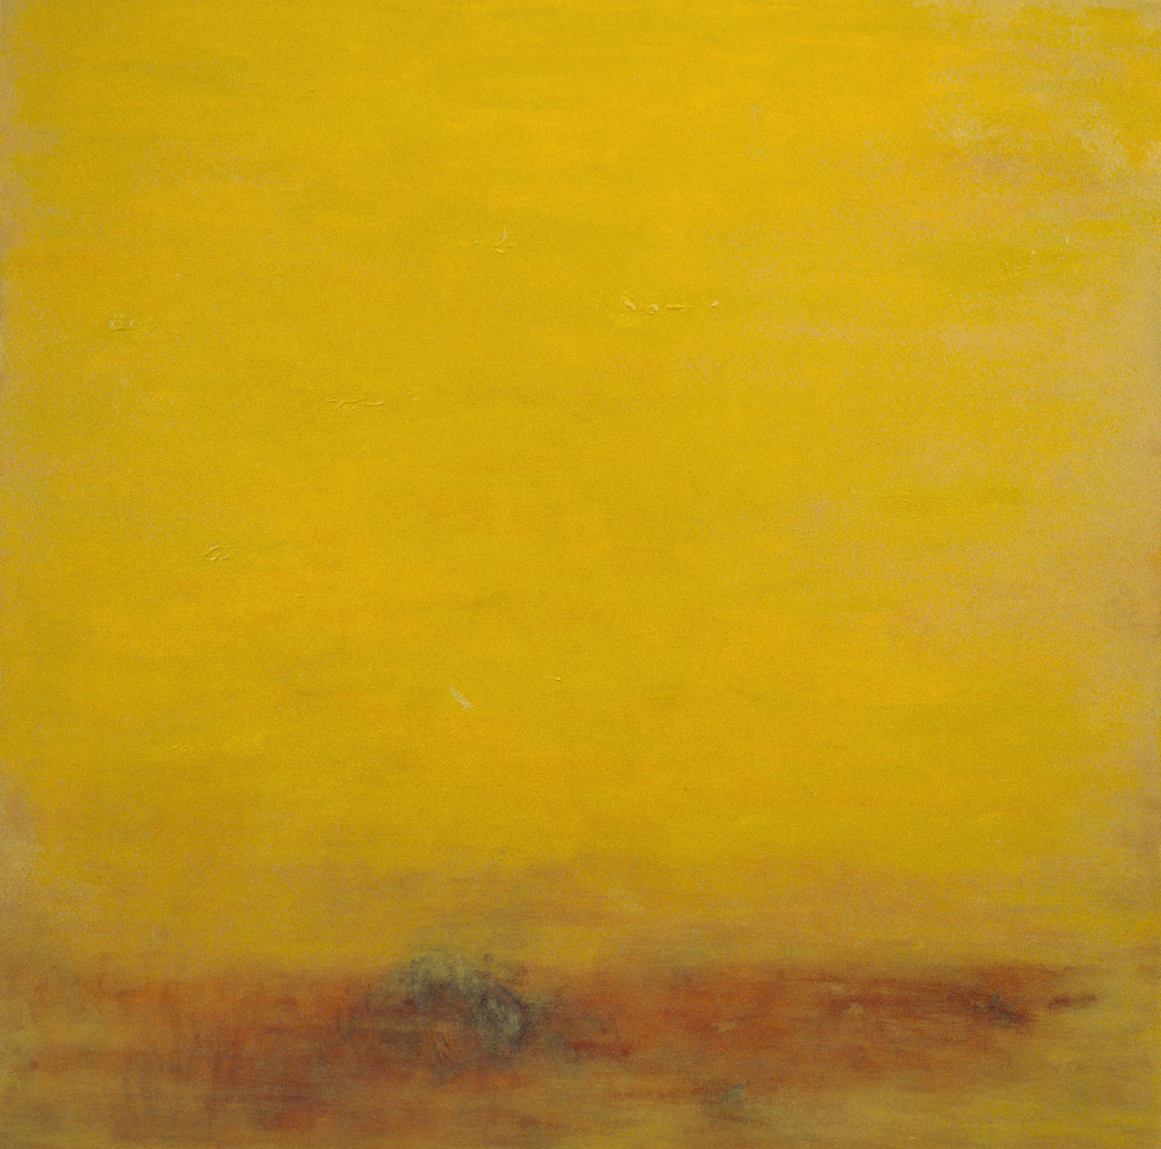  Cover, 2002, oil on canvas, 5’x5’ / 152cm x 152cm 